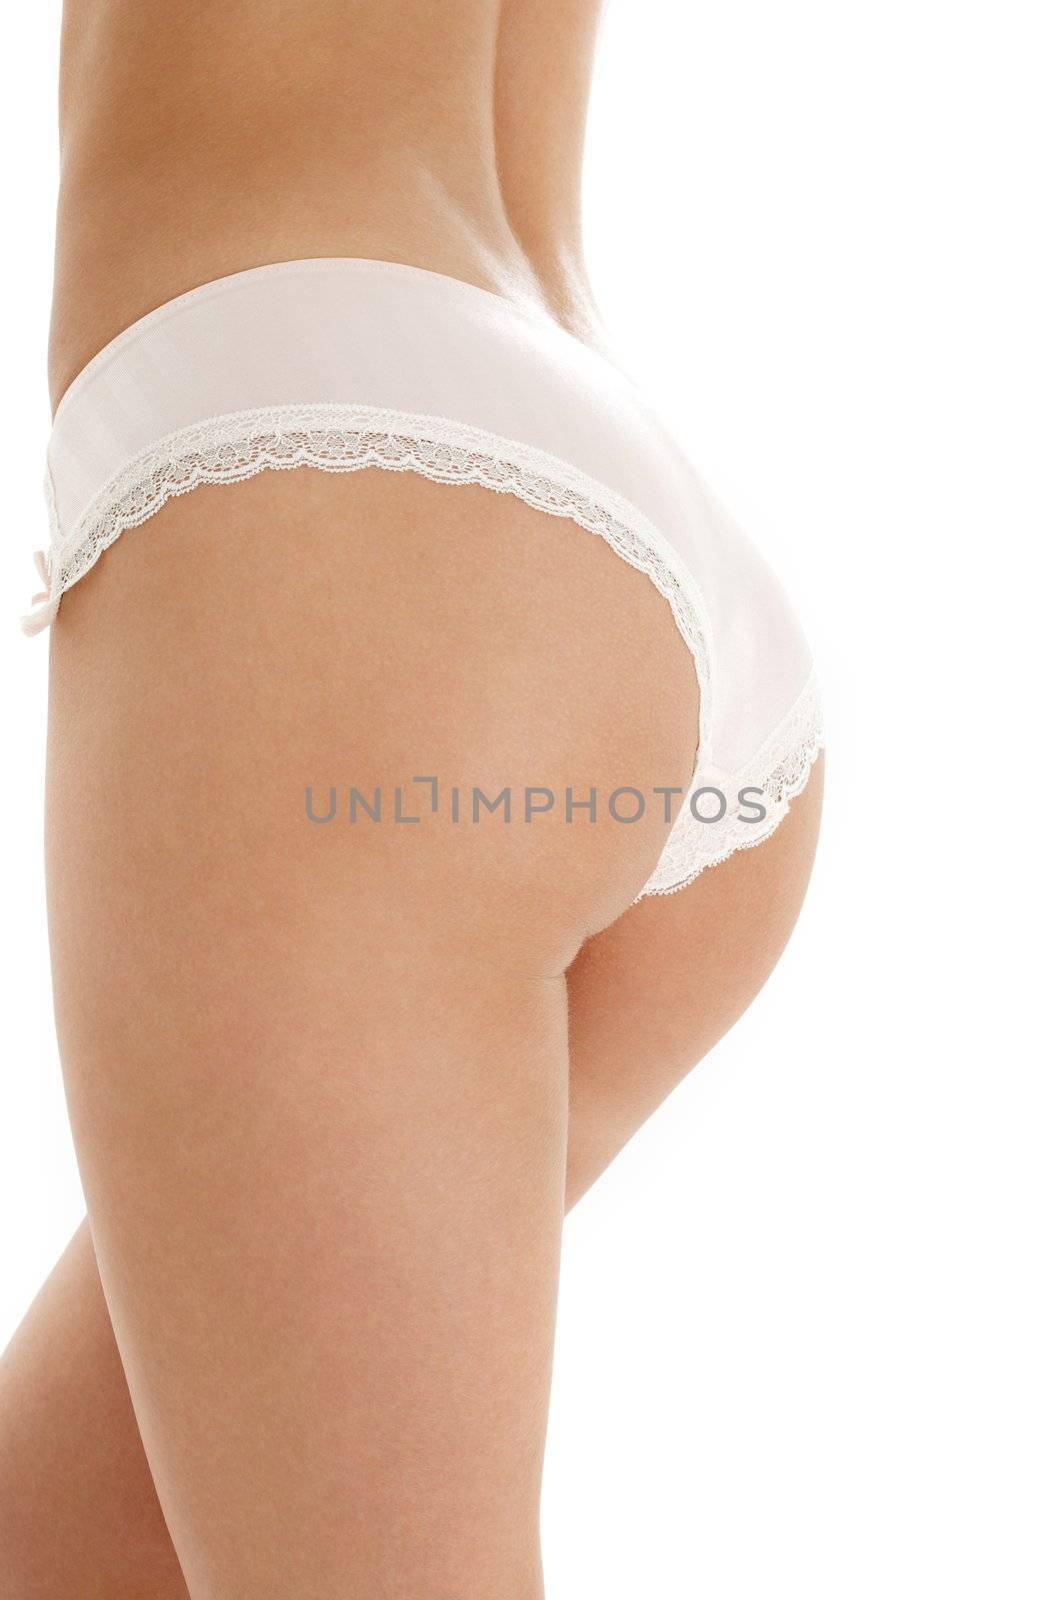 classical image of voluptuous female curves over white